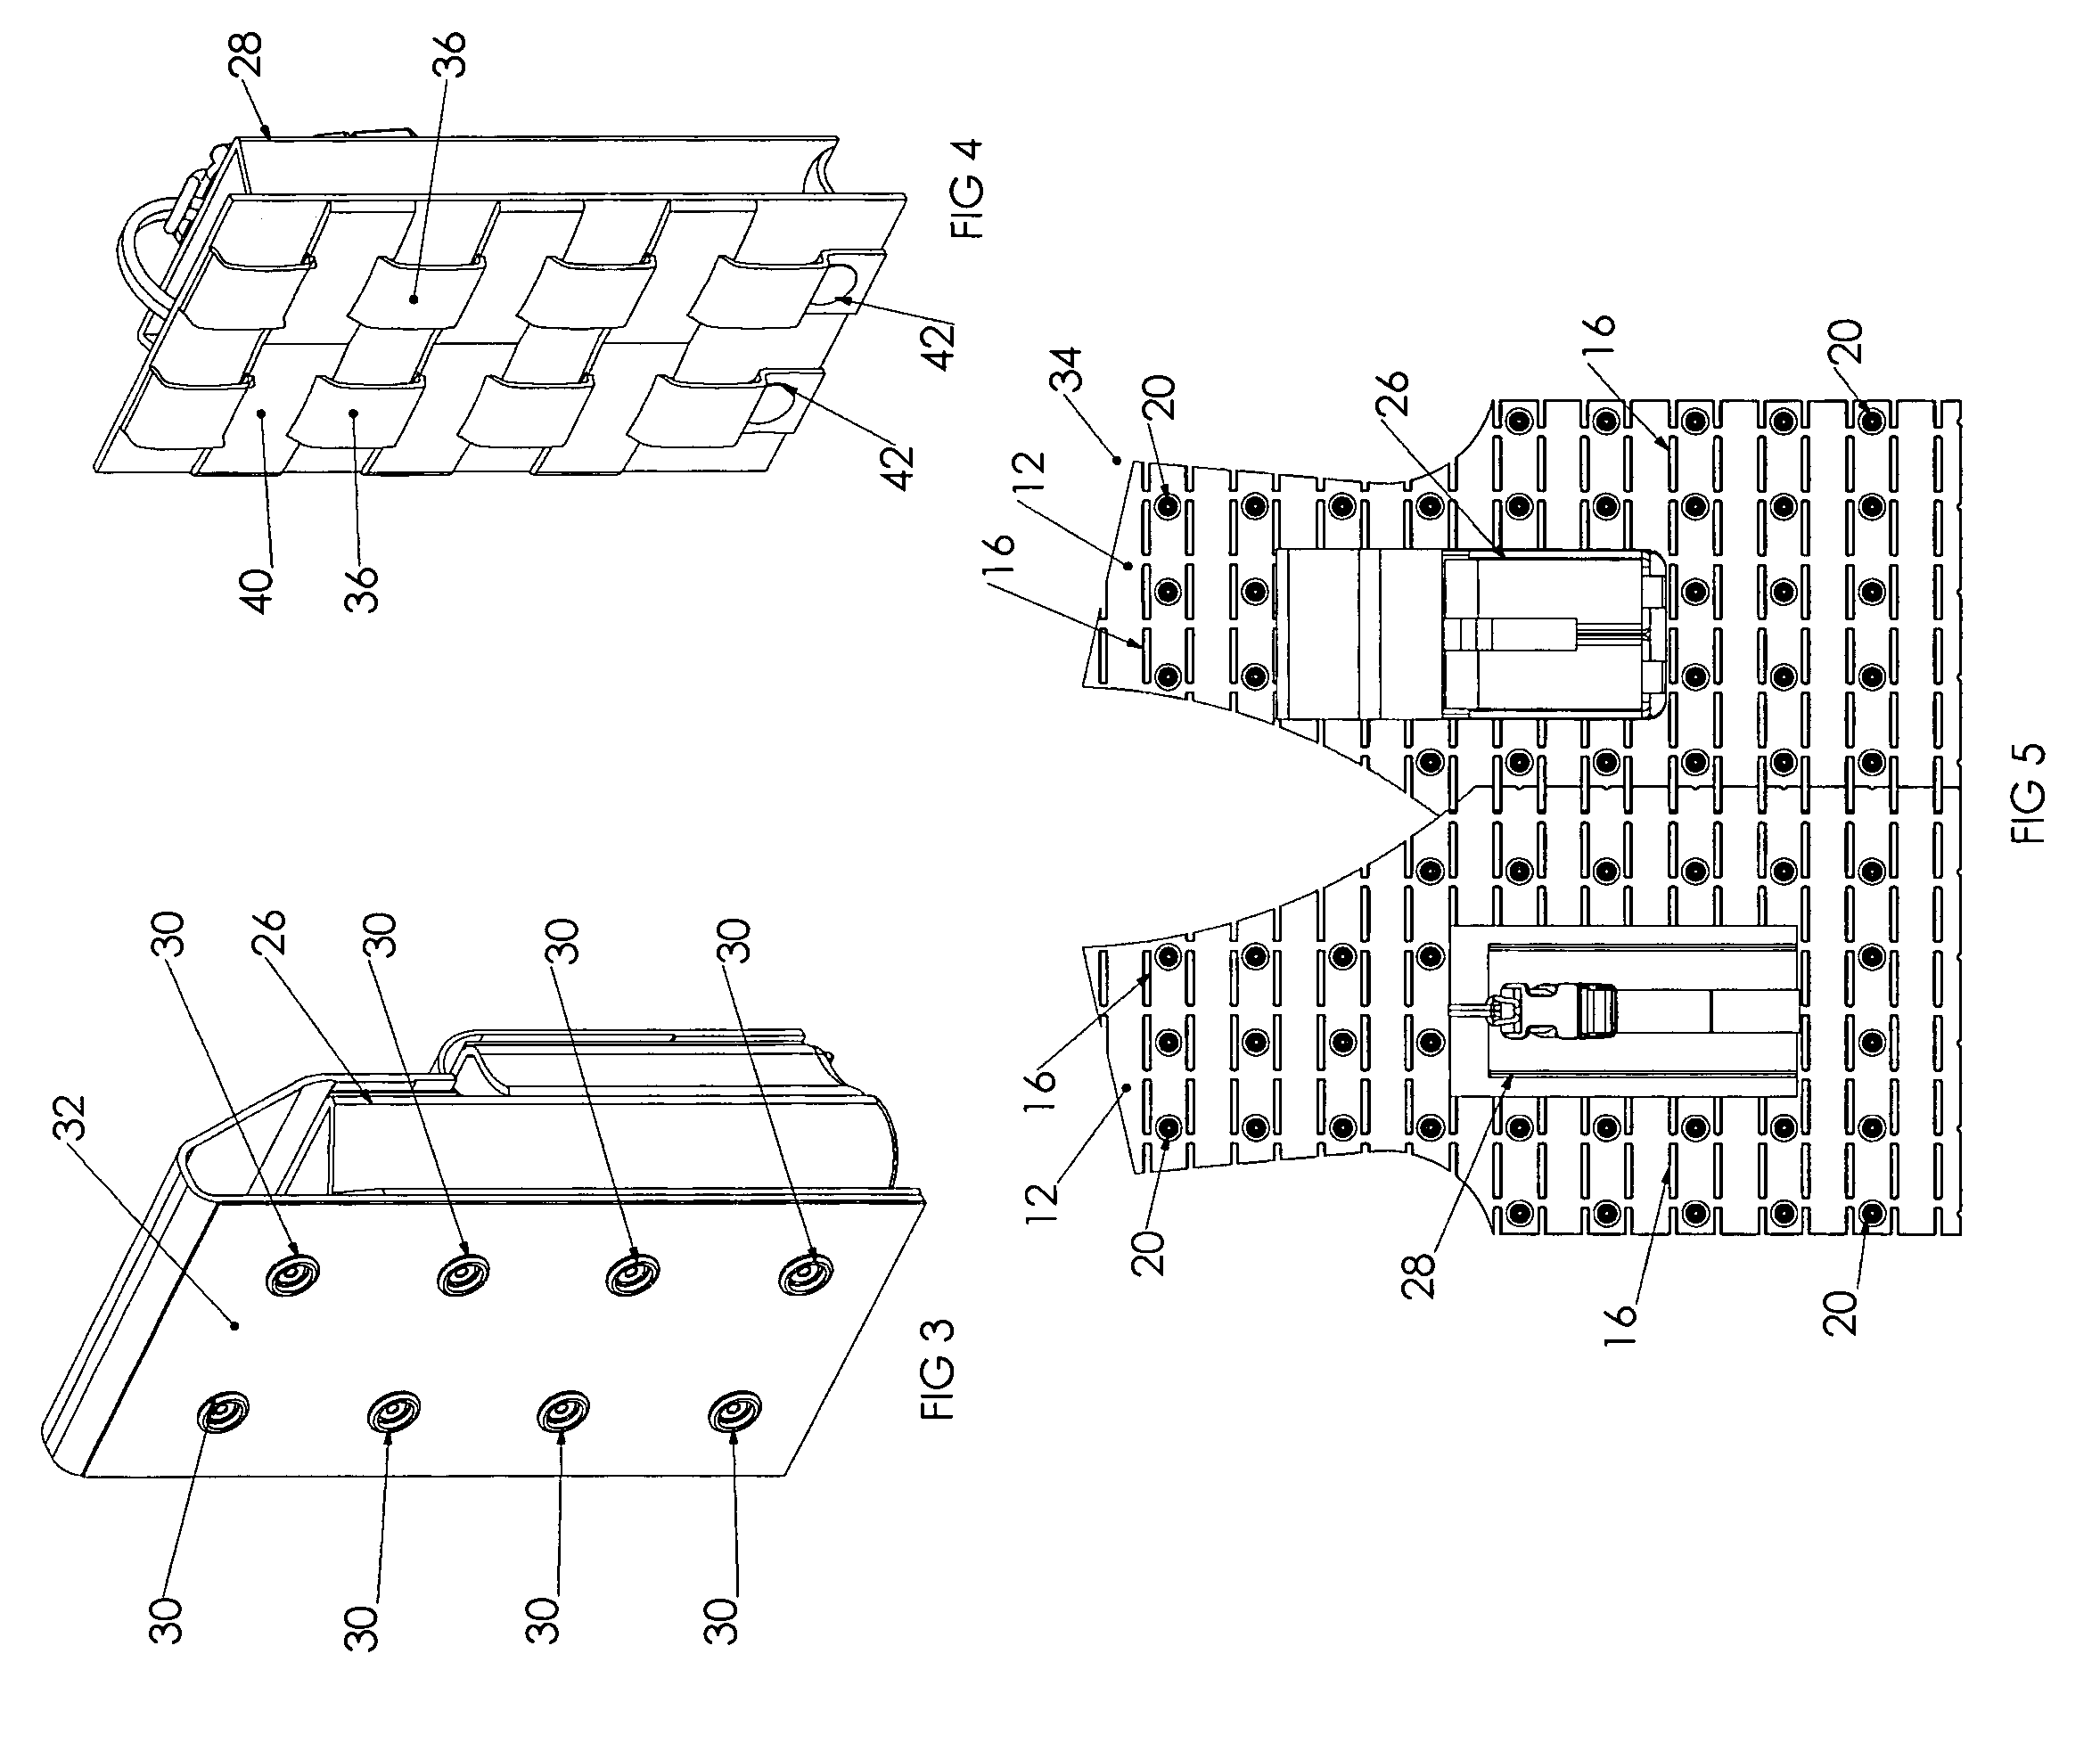 Fabric for load bearing vests having a pocket fastening system